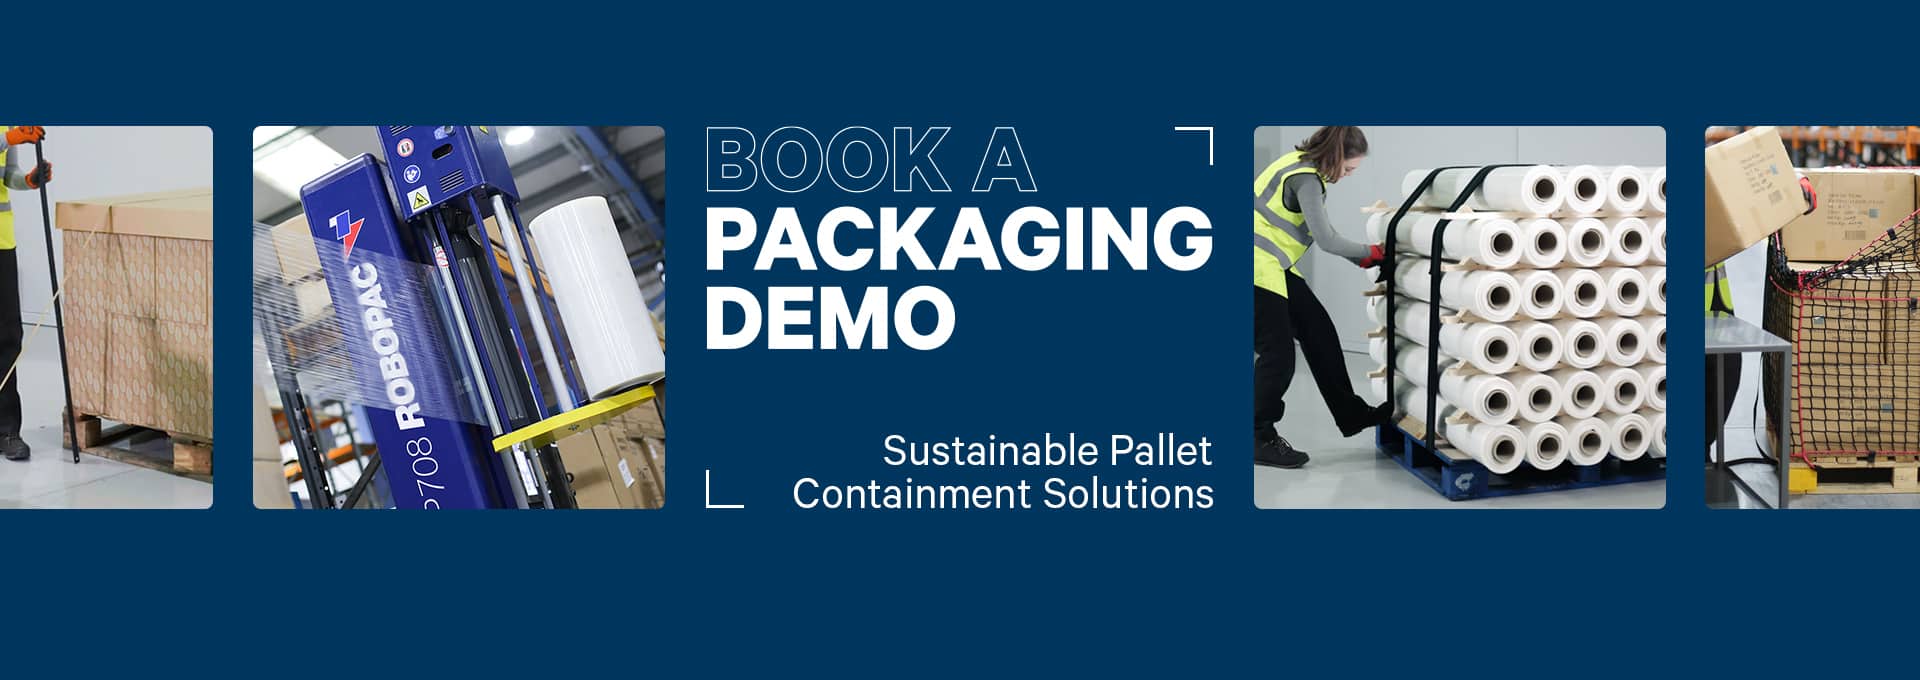 Pallet Containment Demos at Maxpack